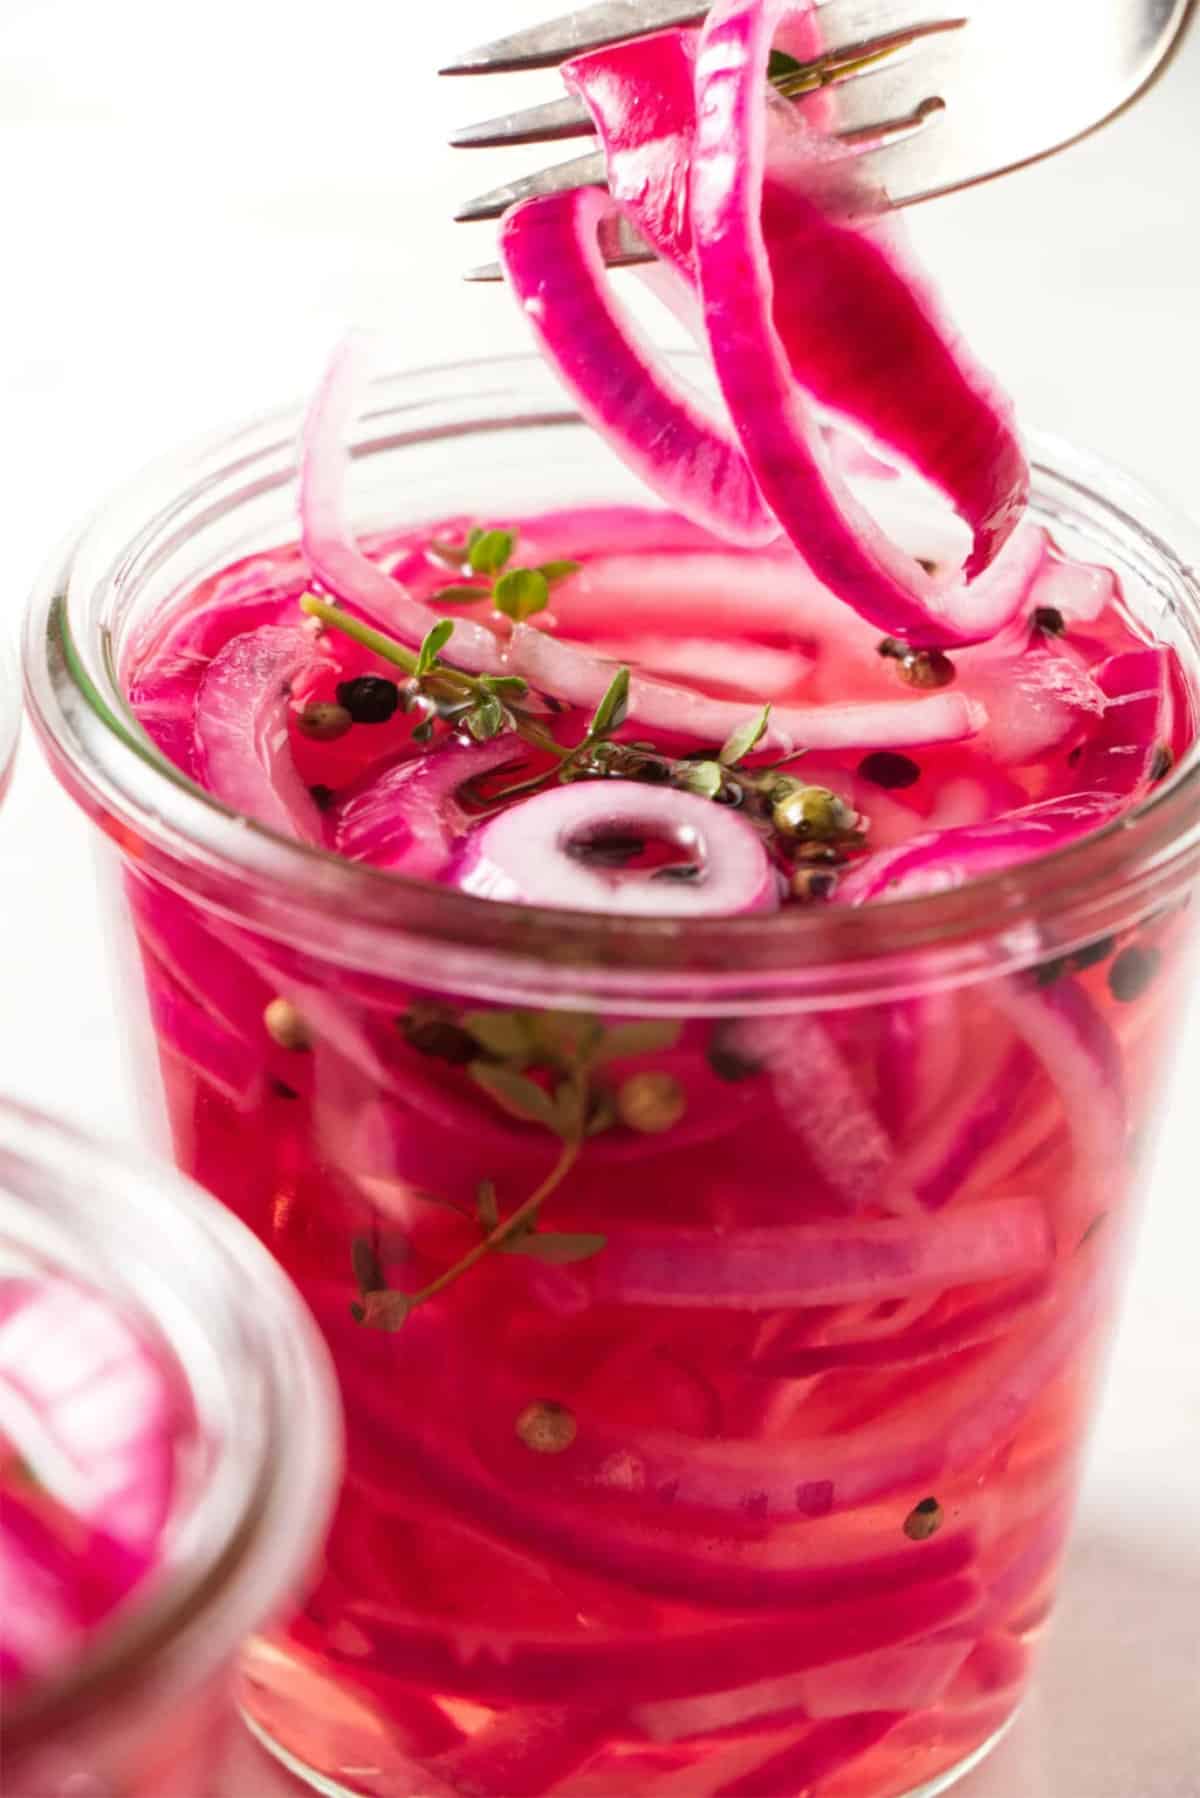 quick pickled onions for cookout condiments.